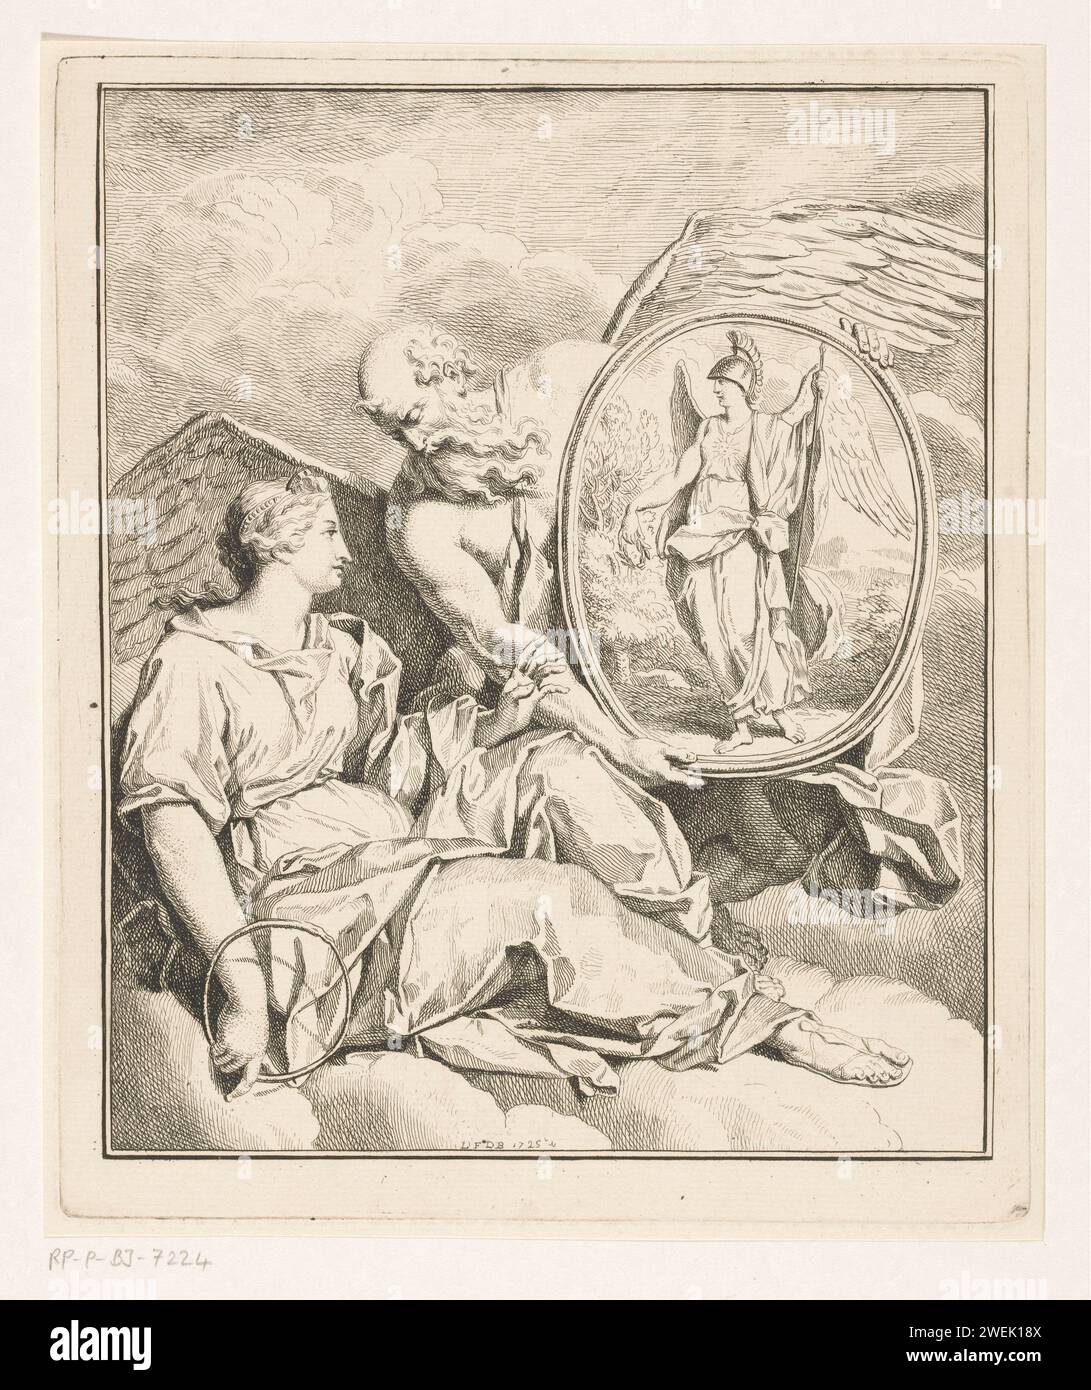 Allegorical representation with father Time that shows the personification of eternity a plaque of Minerva, Louis Fabritius Dubourg, 1725 print   paper etching (story of) Minerva (Pallas, Athena). Father Time, man with wings and scythe. serpent Ouroboros. Eternity, 'Aeternitas'; 'EternitÃ ','EternitÃ o PerpetuitÃ ' (Ripa) Stock Photo